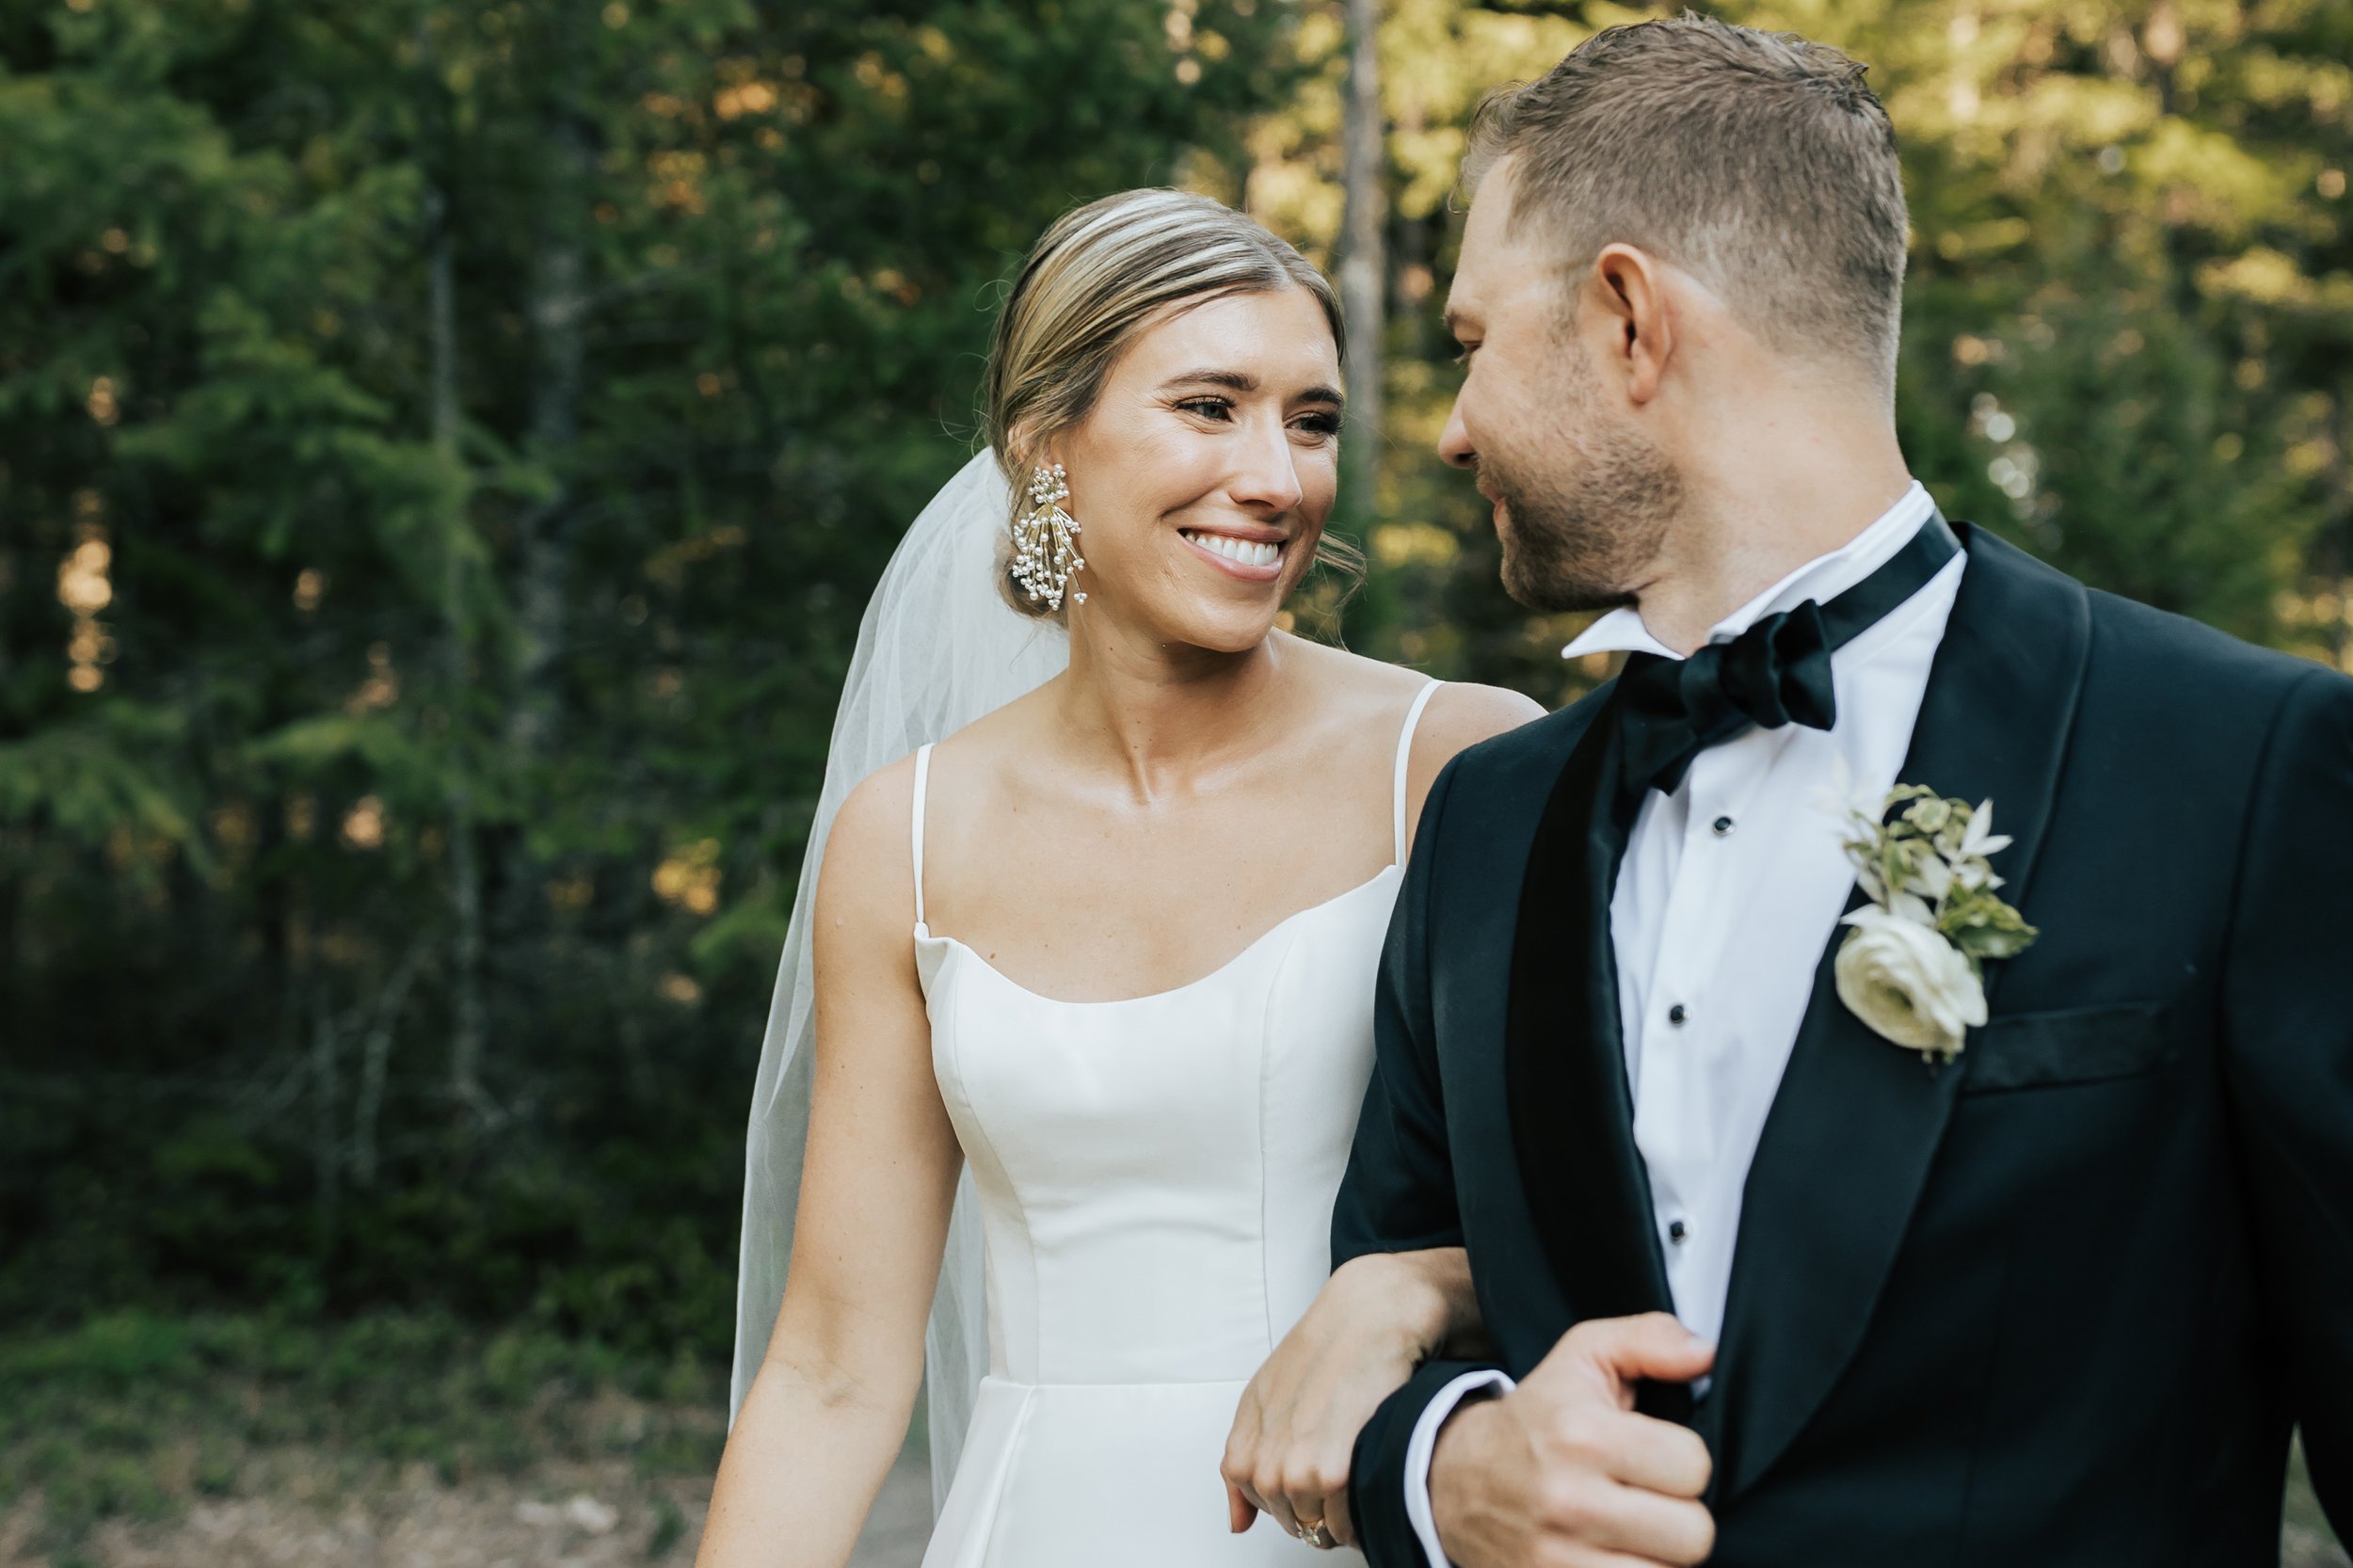  Newly married bride and groom smile at each other as they walk in the forest in Whitefish, Montana. Wedding inspo. Bride is wearing gorgeous large white earrings with a strappy wedding dress and groom is wearing a black suit and bowtie. #montanawedd